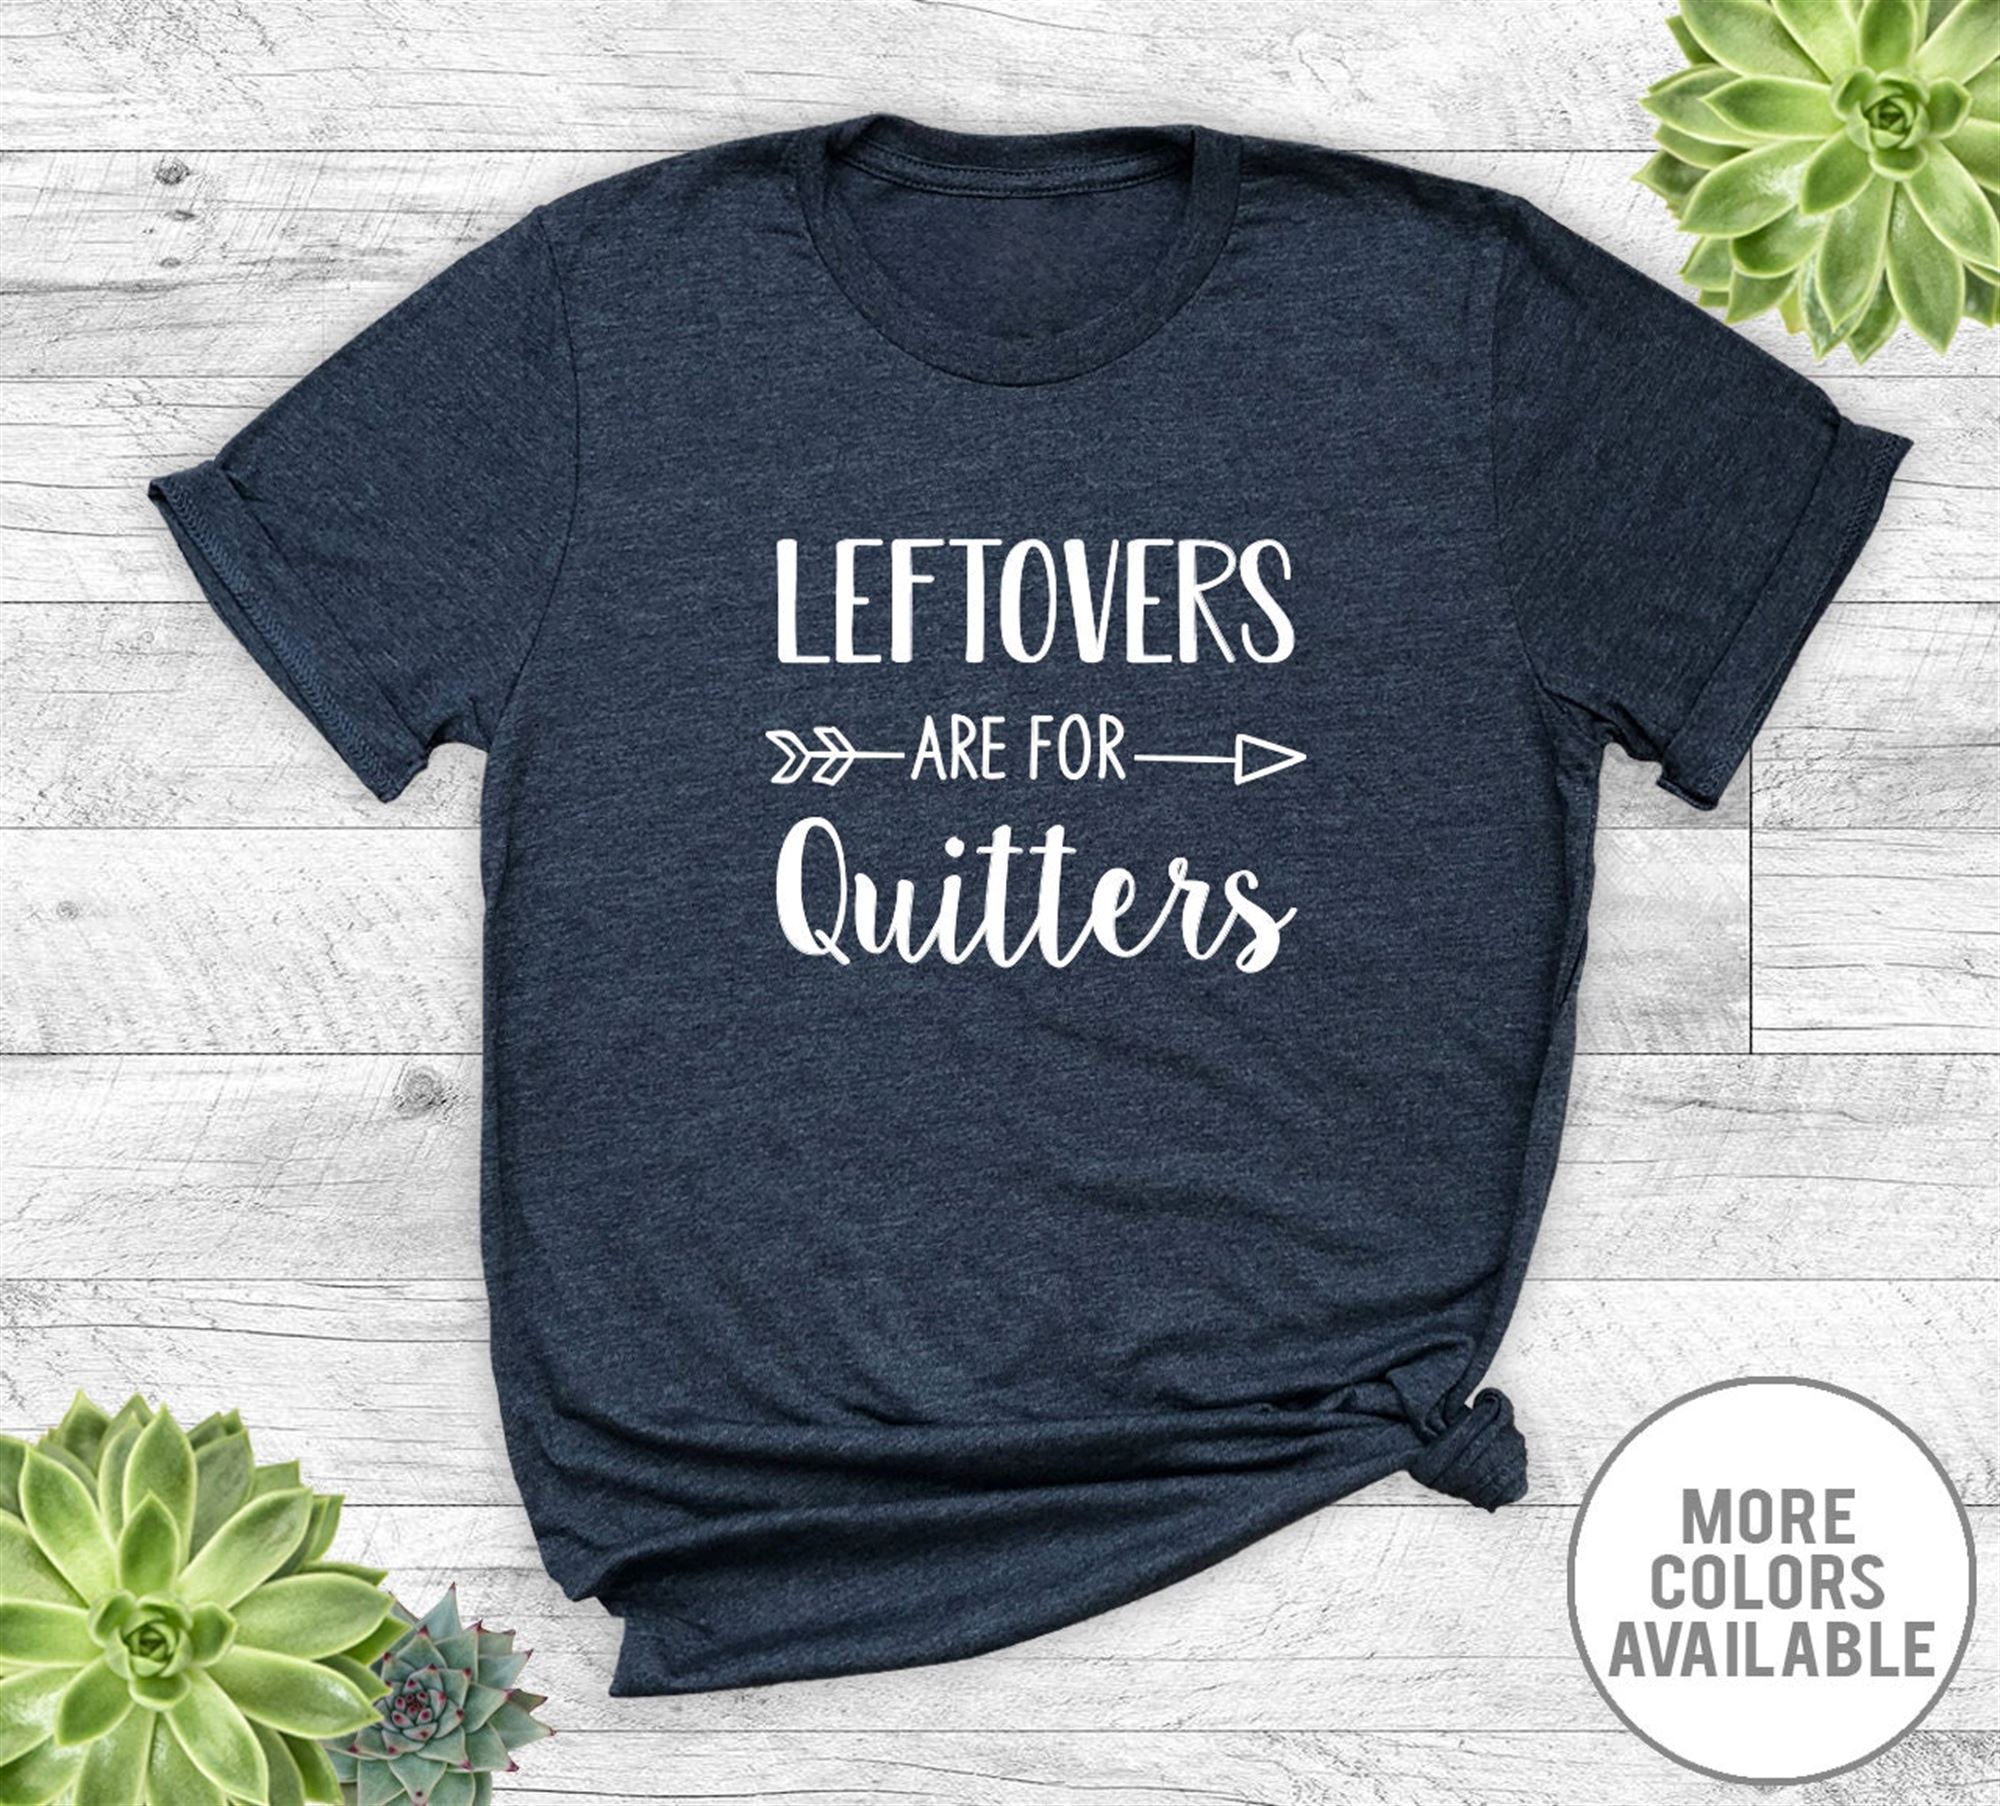 Great Leftovers Are For Quitters - Unisex T-shirt - Thanksgiving Shirt - Thanksgiving Day Gift - Funny Gift 